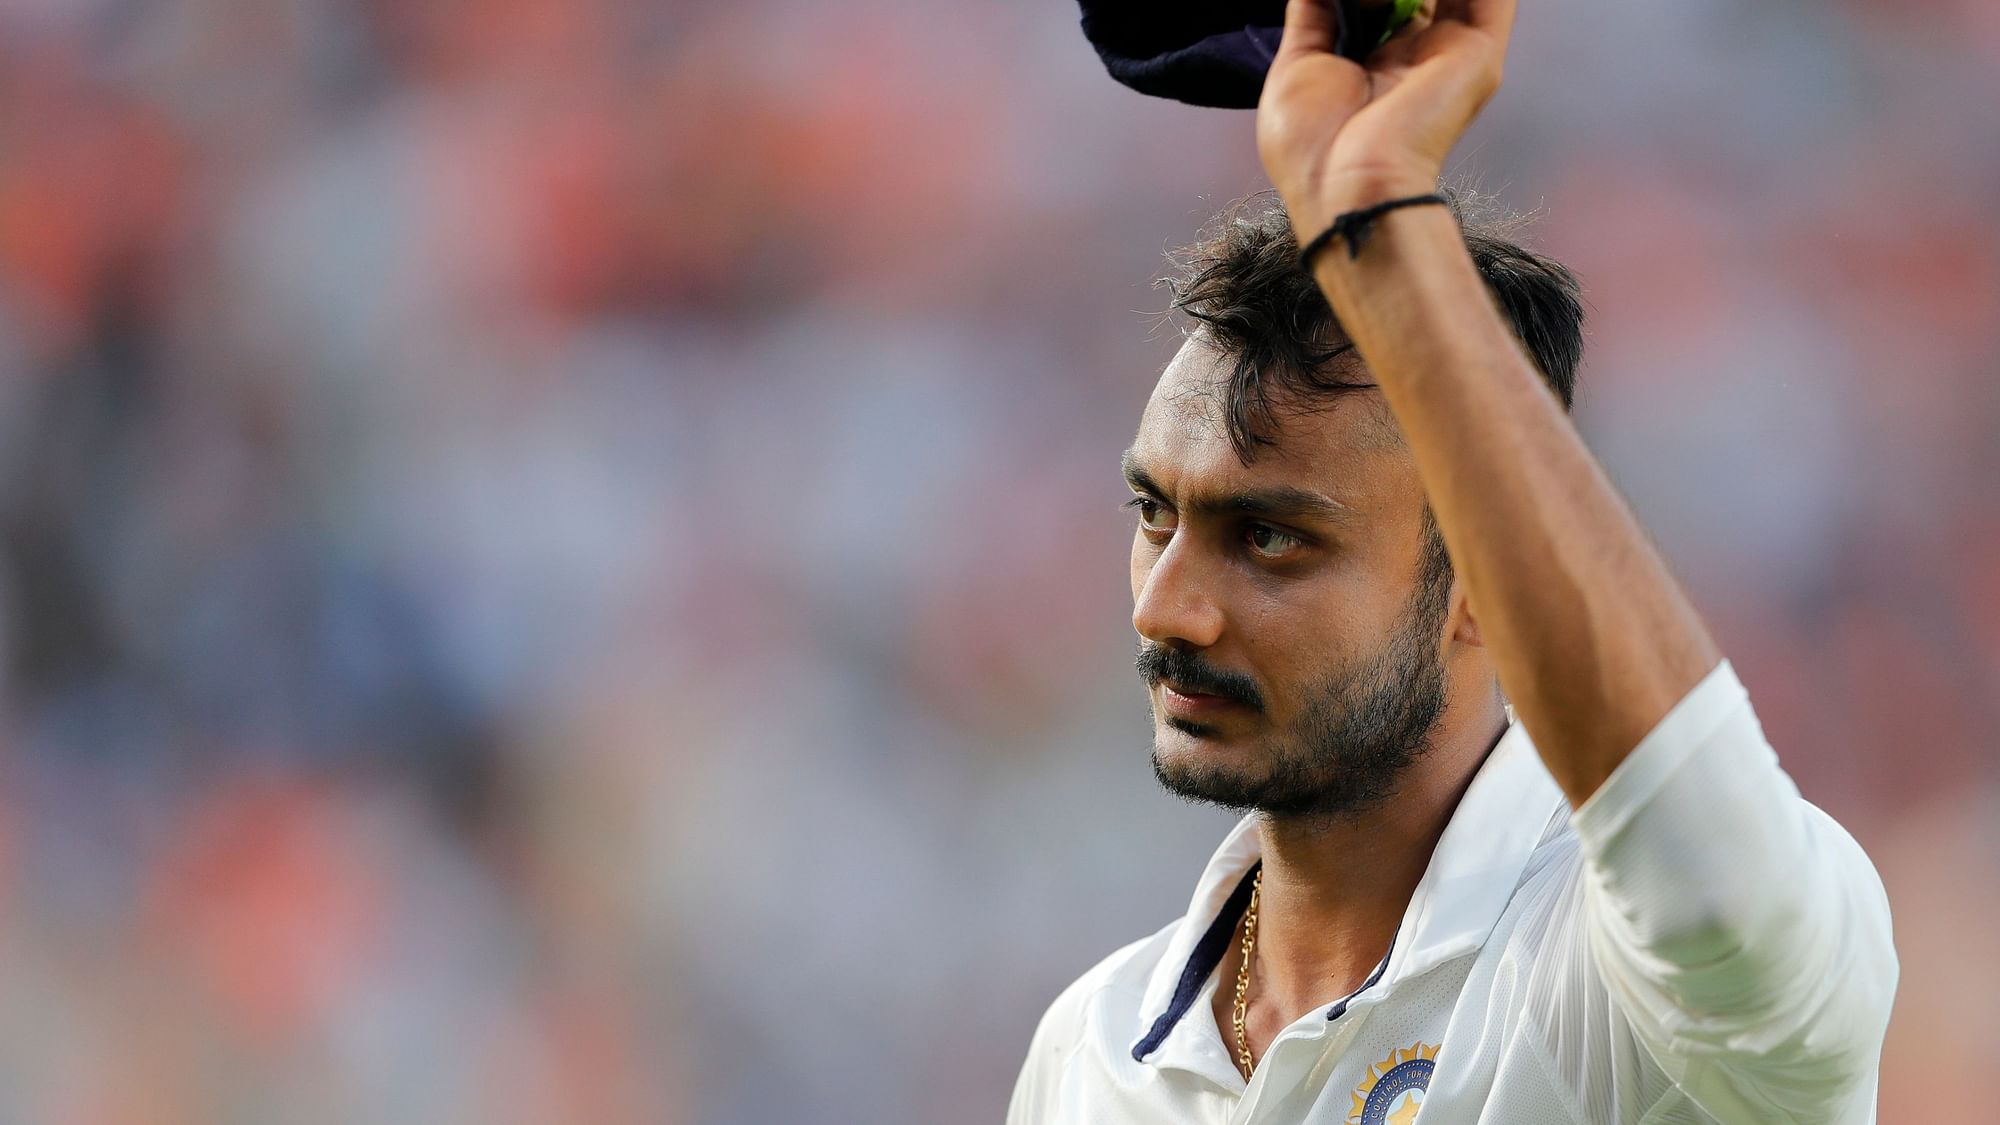 Axar Patel picked 6 wickets for 38 runs during Day 1 of the third Test between India and England at Motera